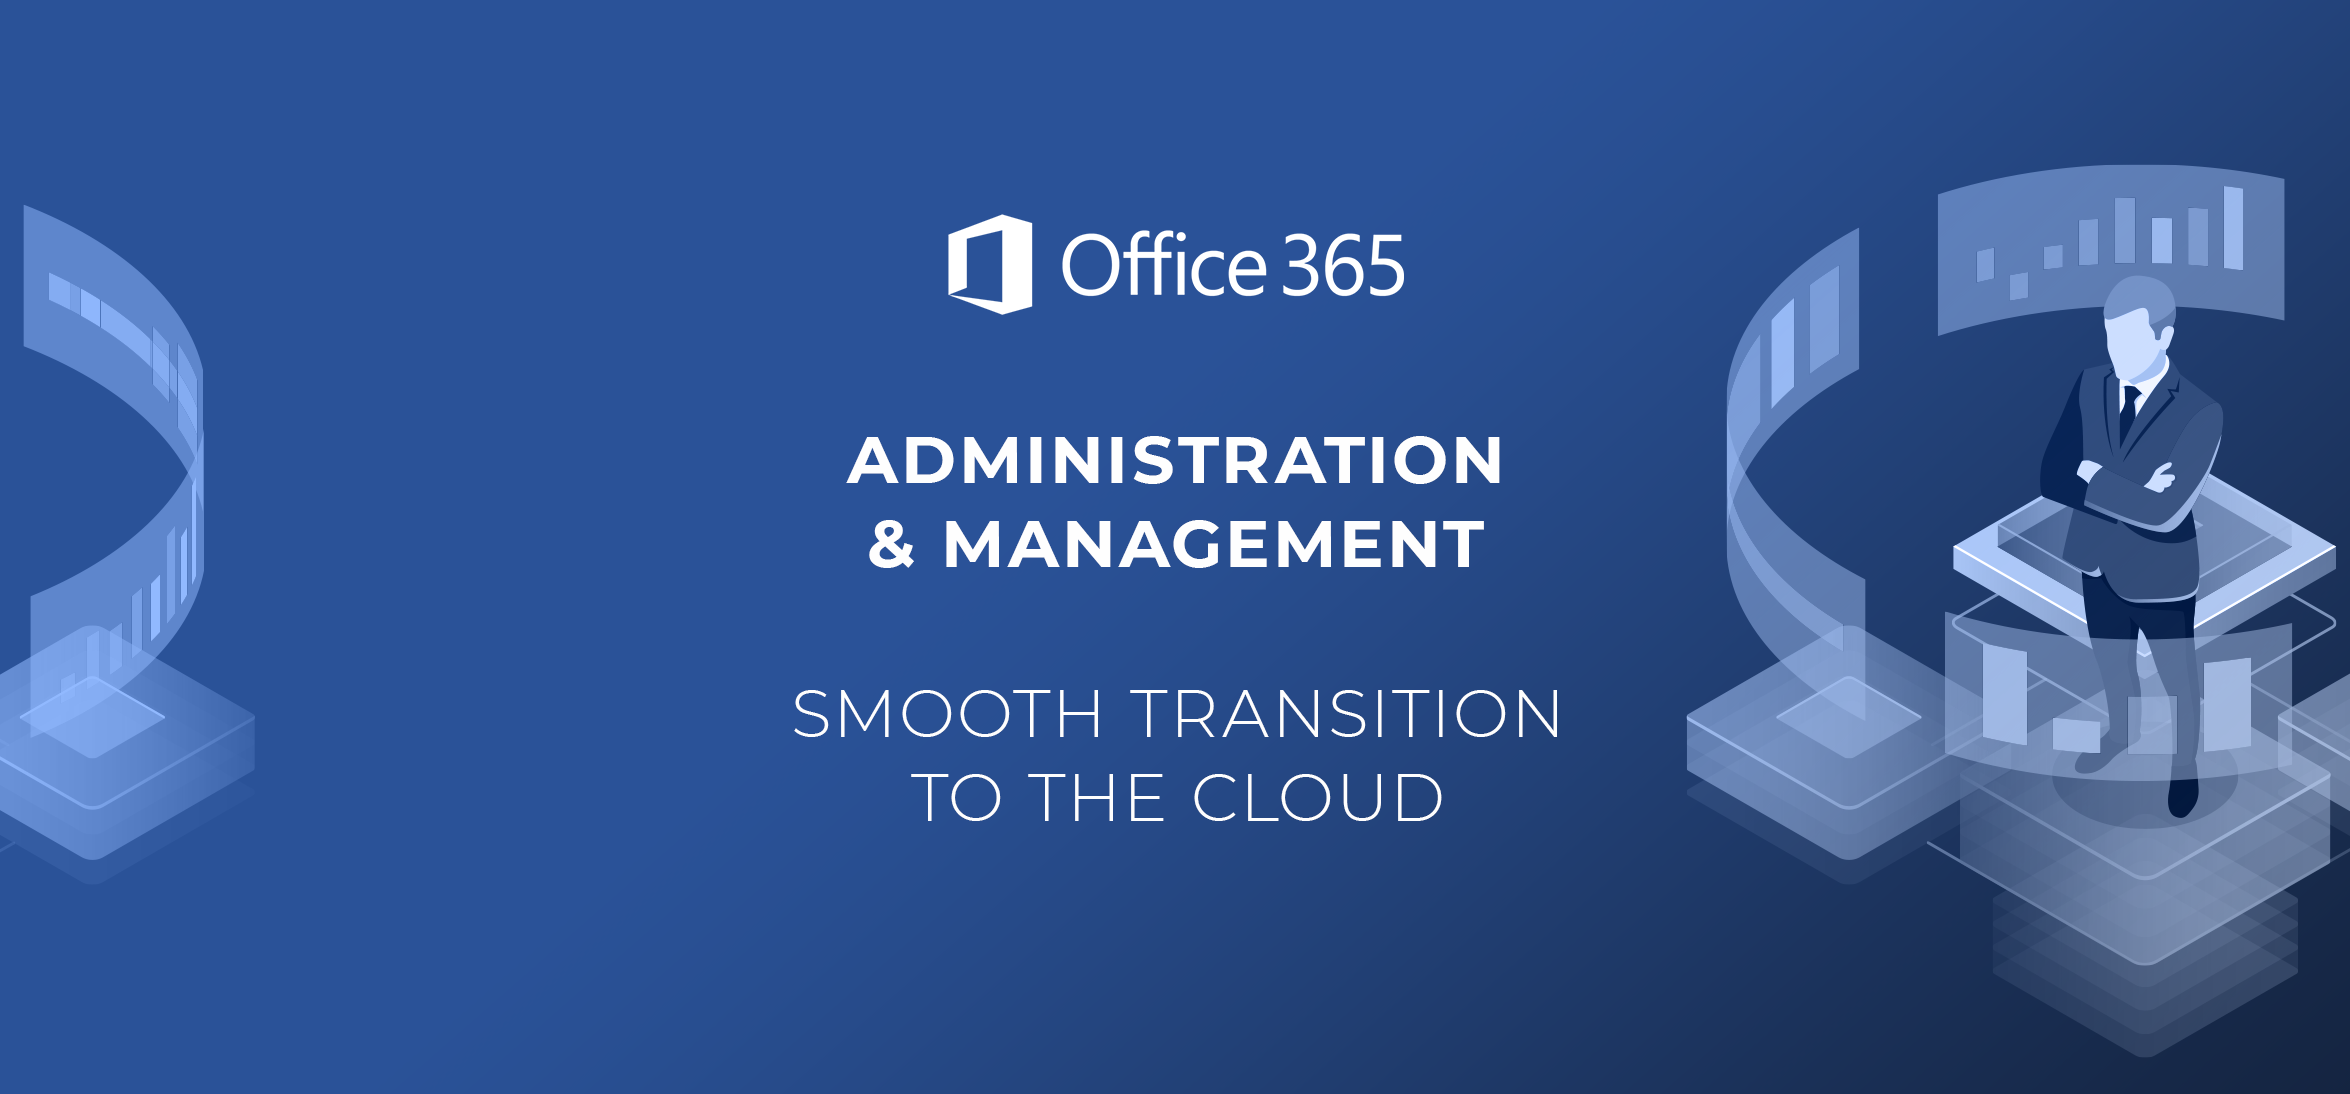 Microsoft Office 365 Administration Services in Lumberton NJ, 08048